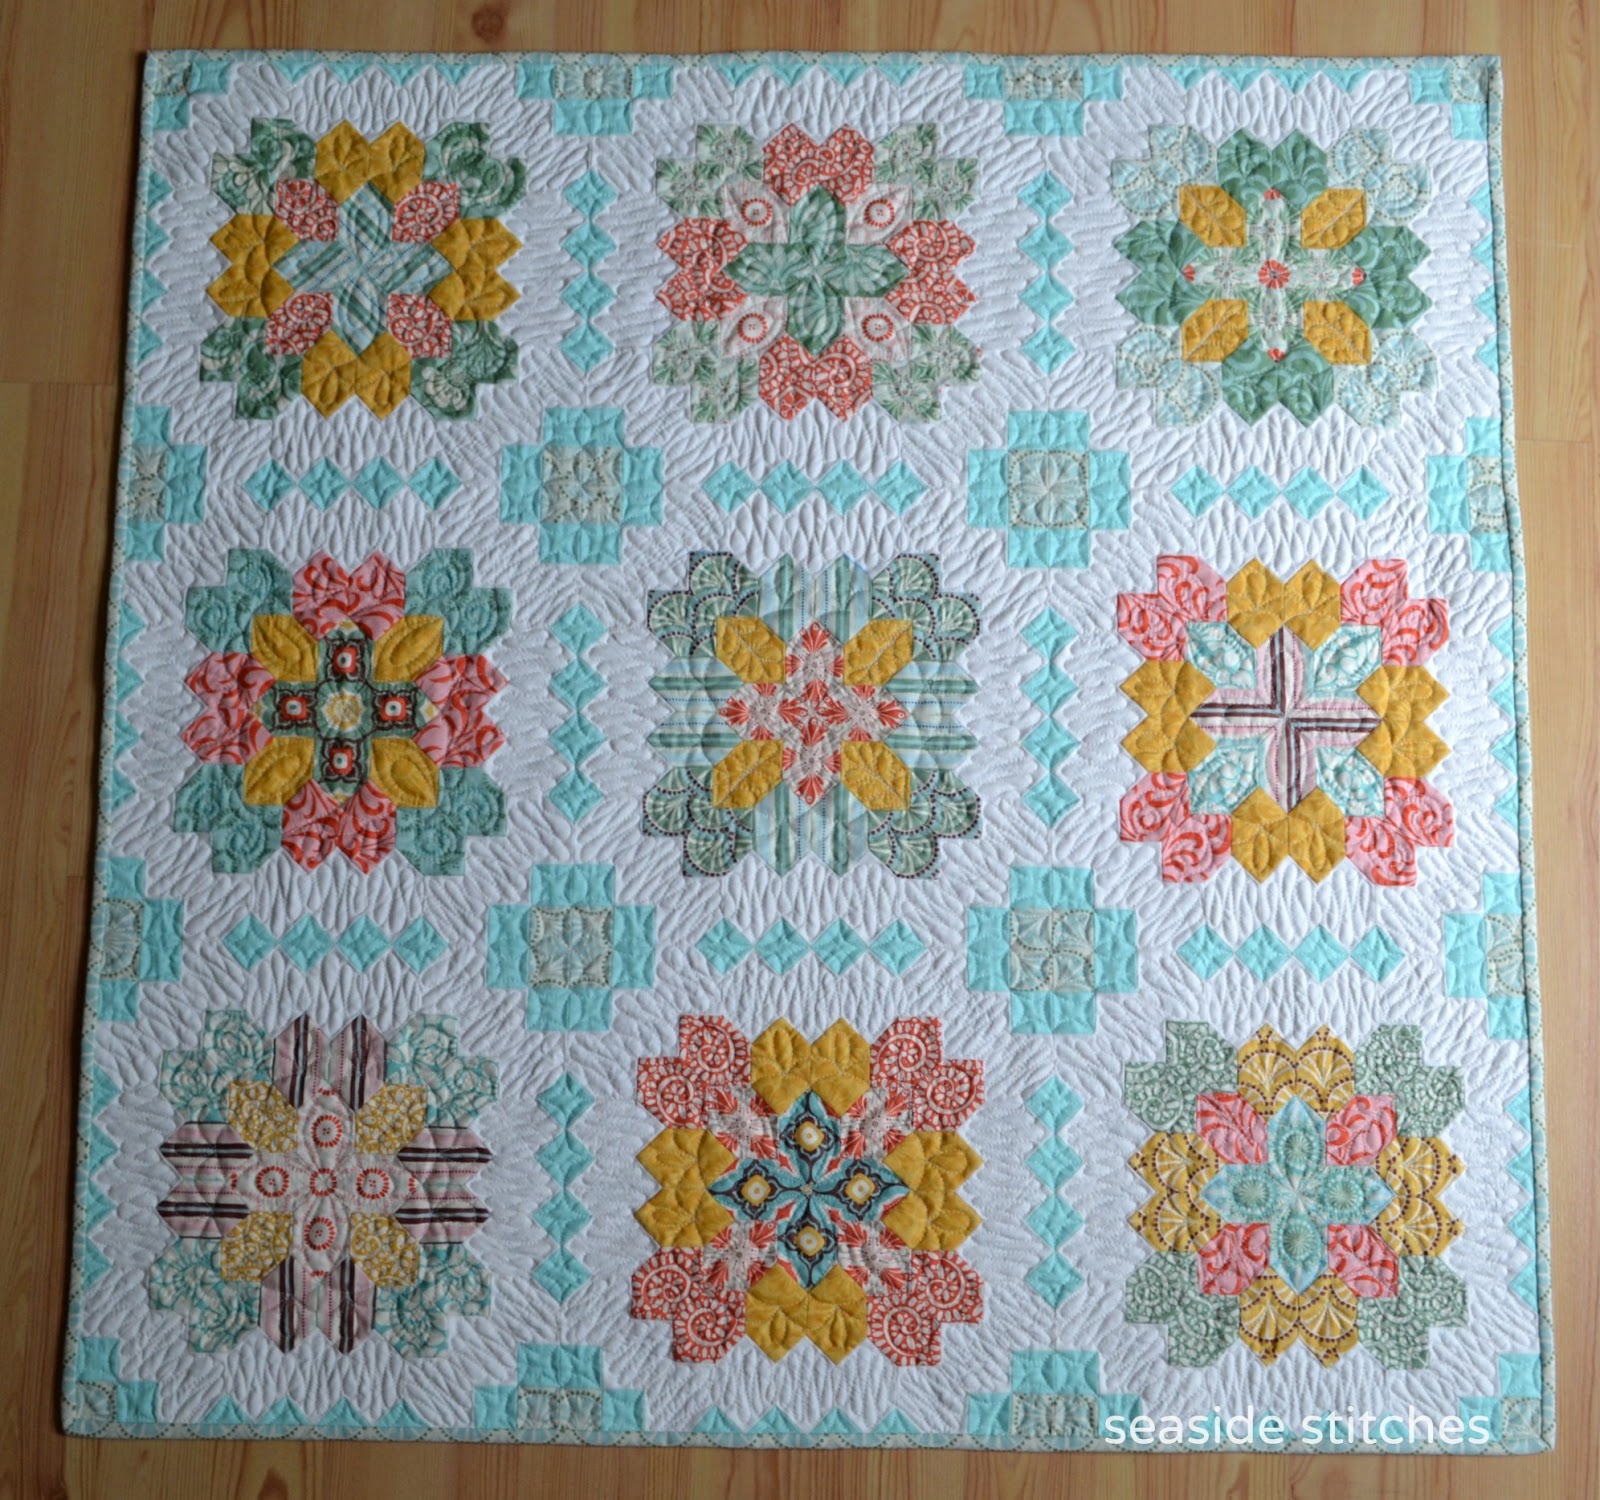 Naive Melody Quilt Pattern - Paper Pattern – Lucy Engels